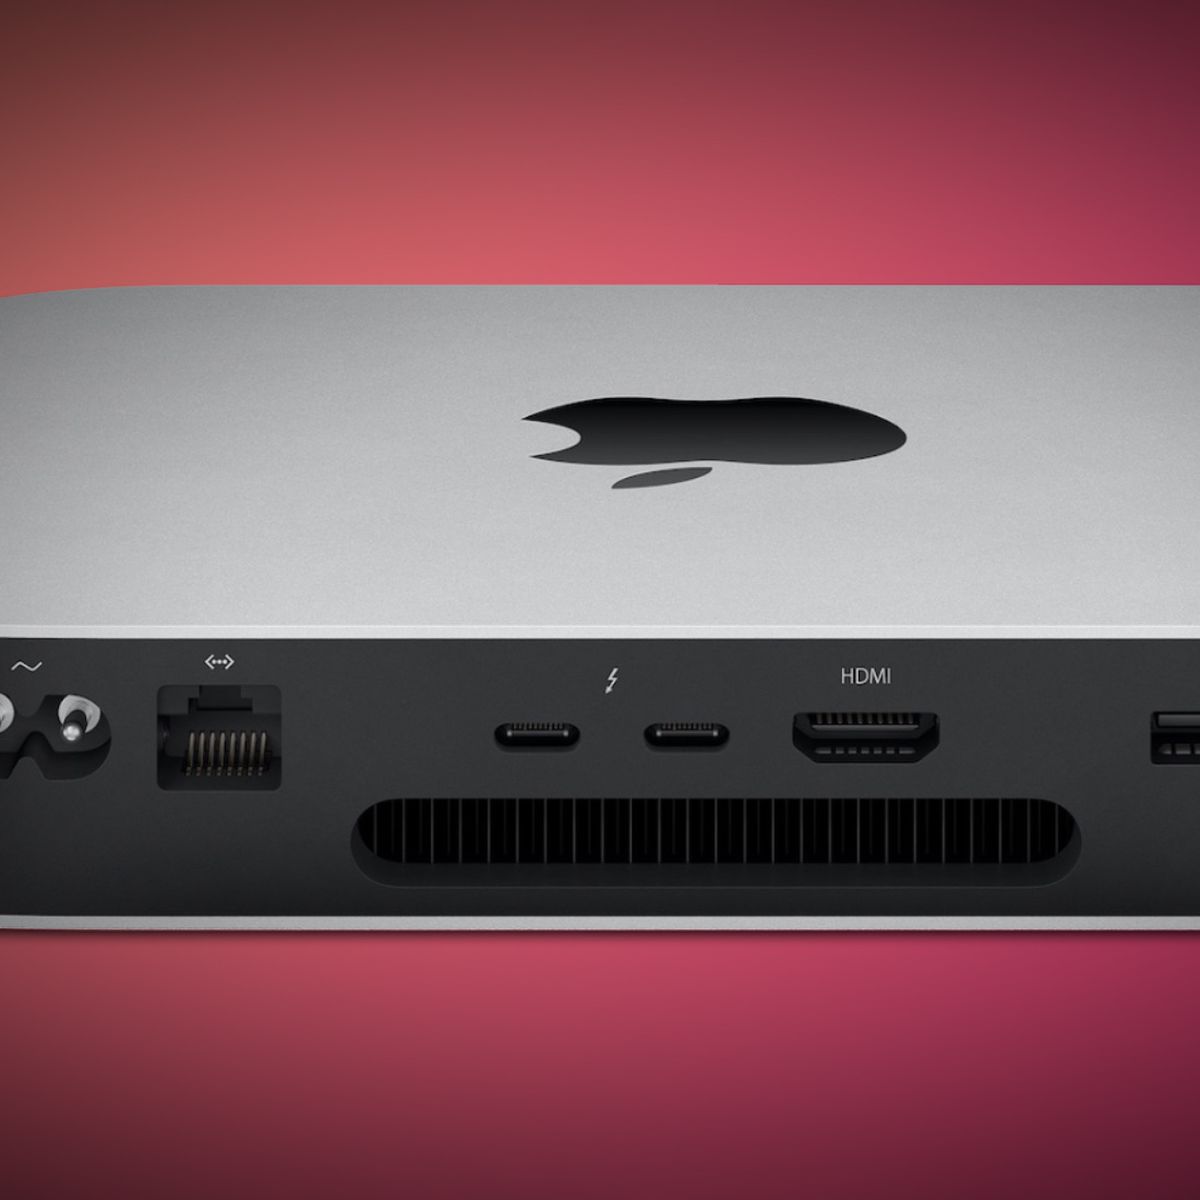 Deals: Get Apple's 512GB M1 Mac Mini for Record Low of $799 on Amazon ($100  Off) - MacRumors